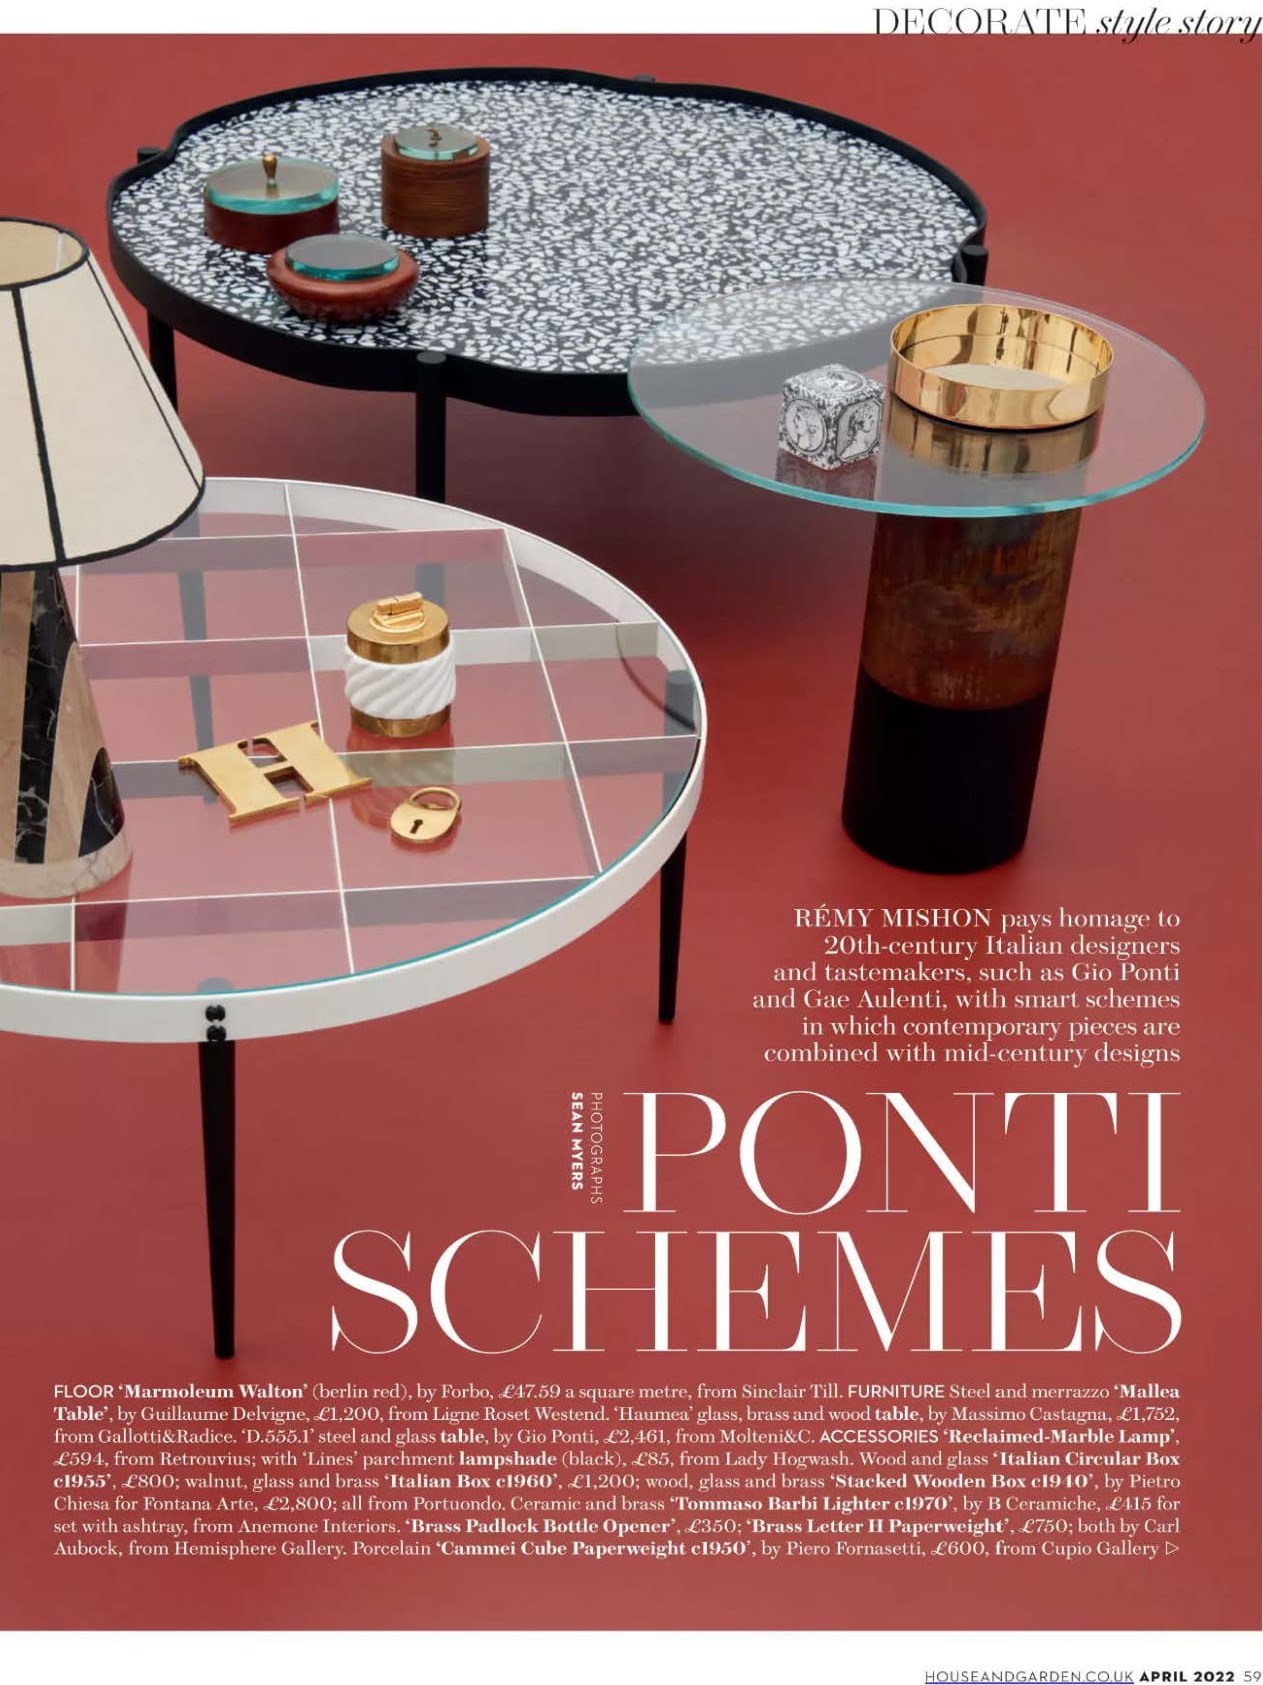 House & Garden pay homage to 20th century Italian tastemakers with Ligne Roset's Mallea table...